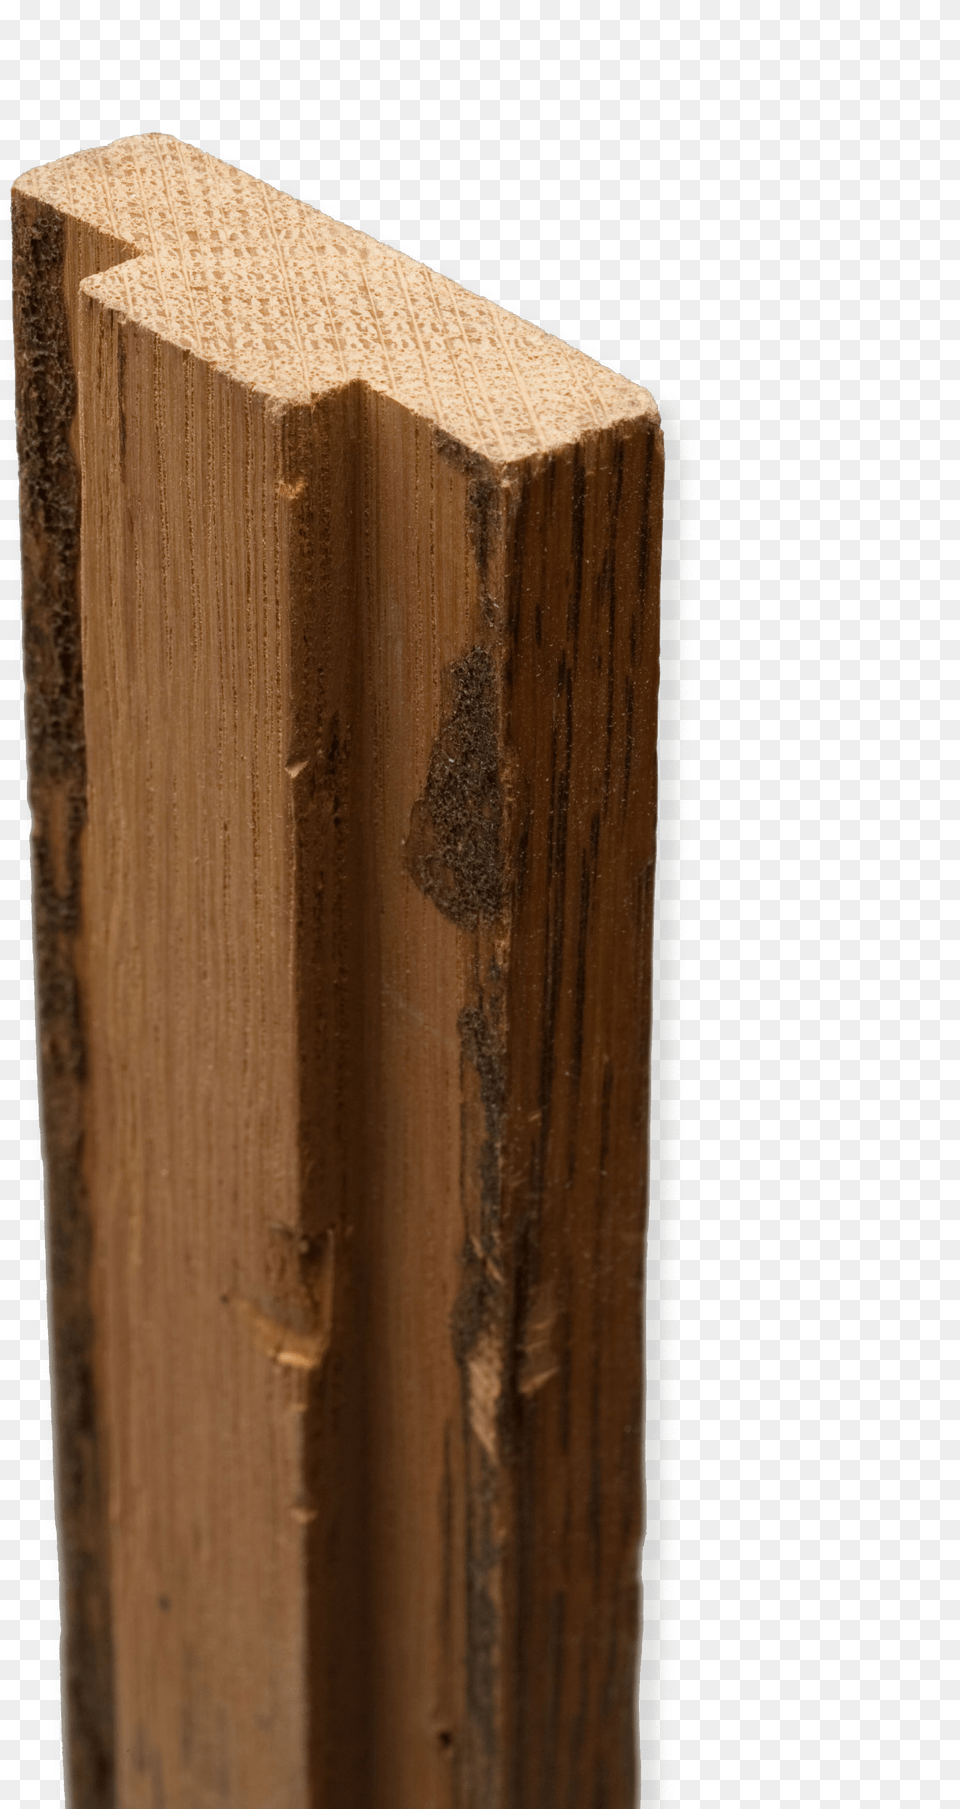 File On Parliamentdoor Plywood Free Png Download